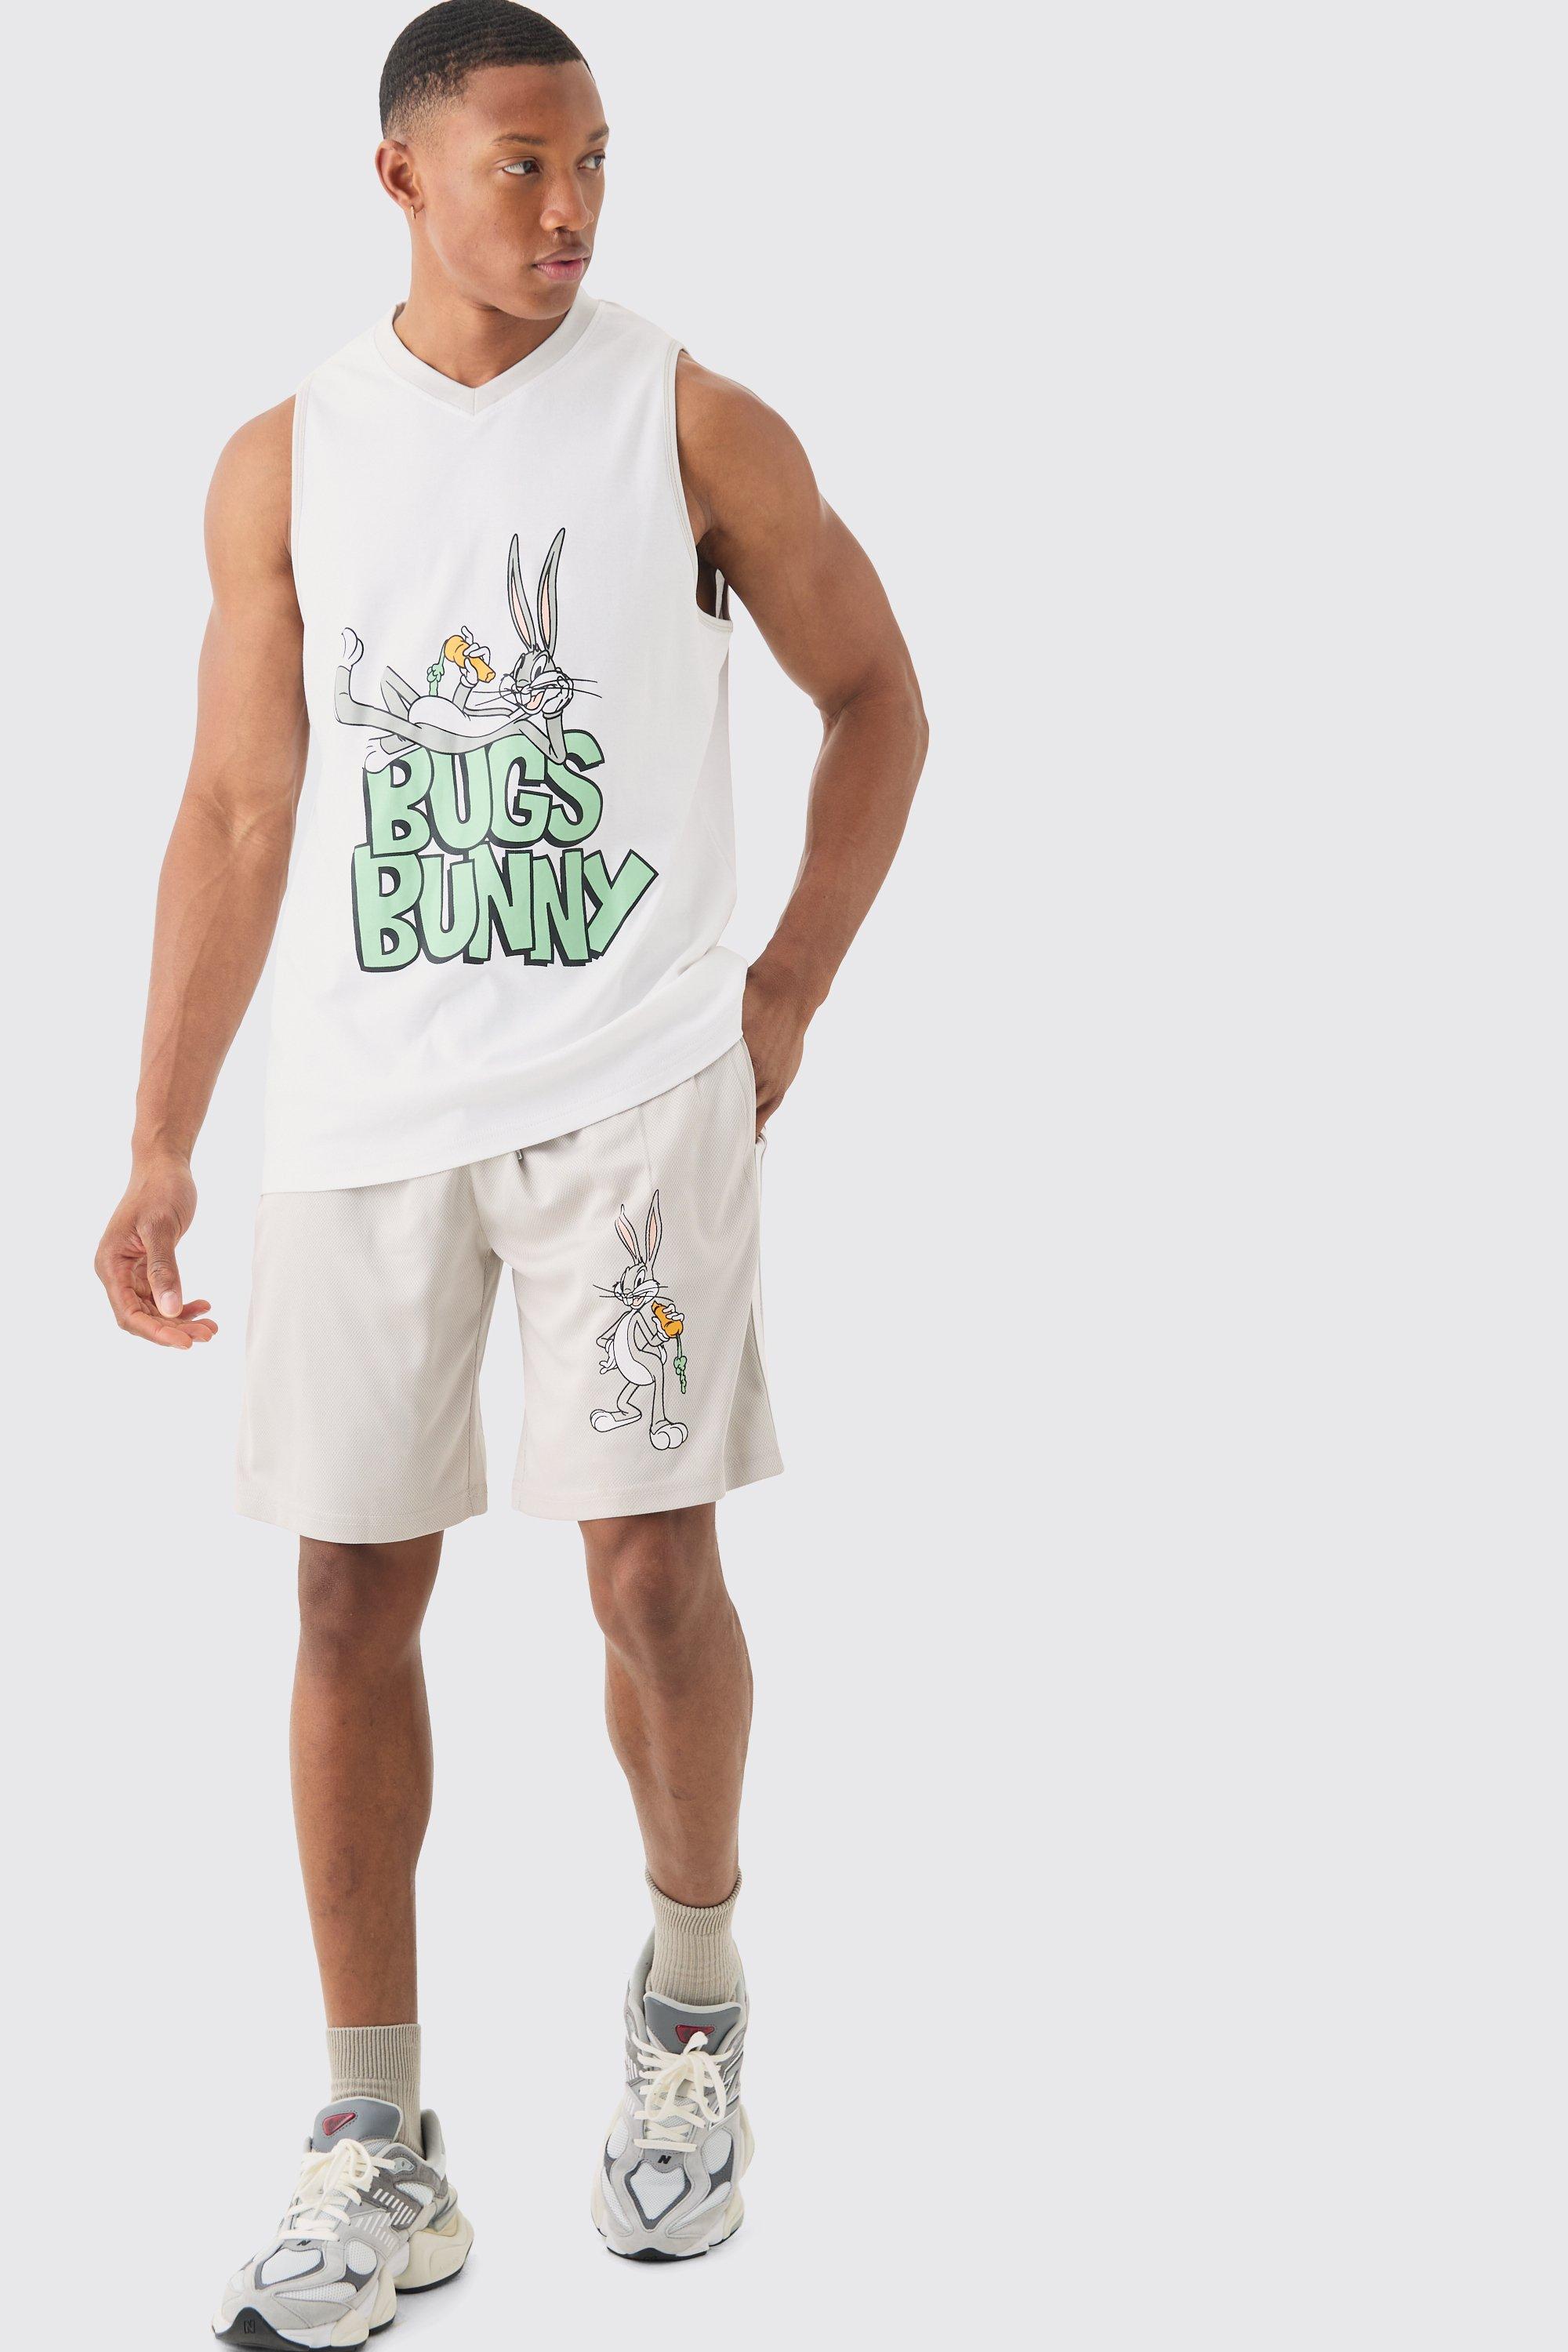 Image of Oversized Bugs Bunny Looney Tunes License Mesh Vest And Short Set, Grigio